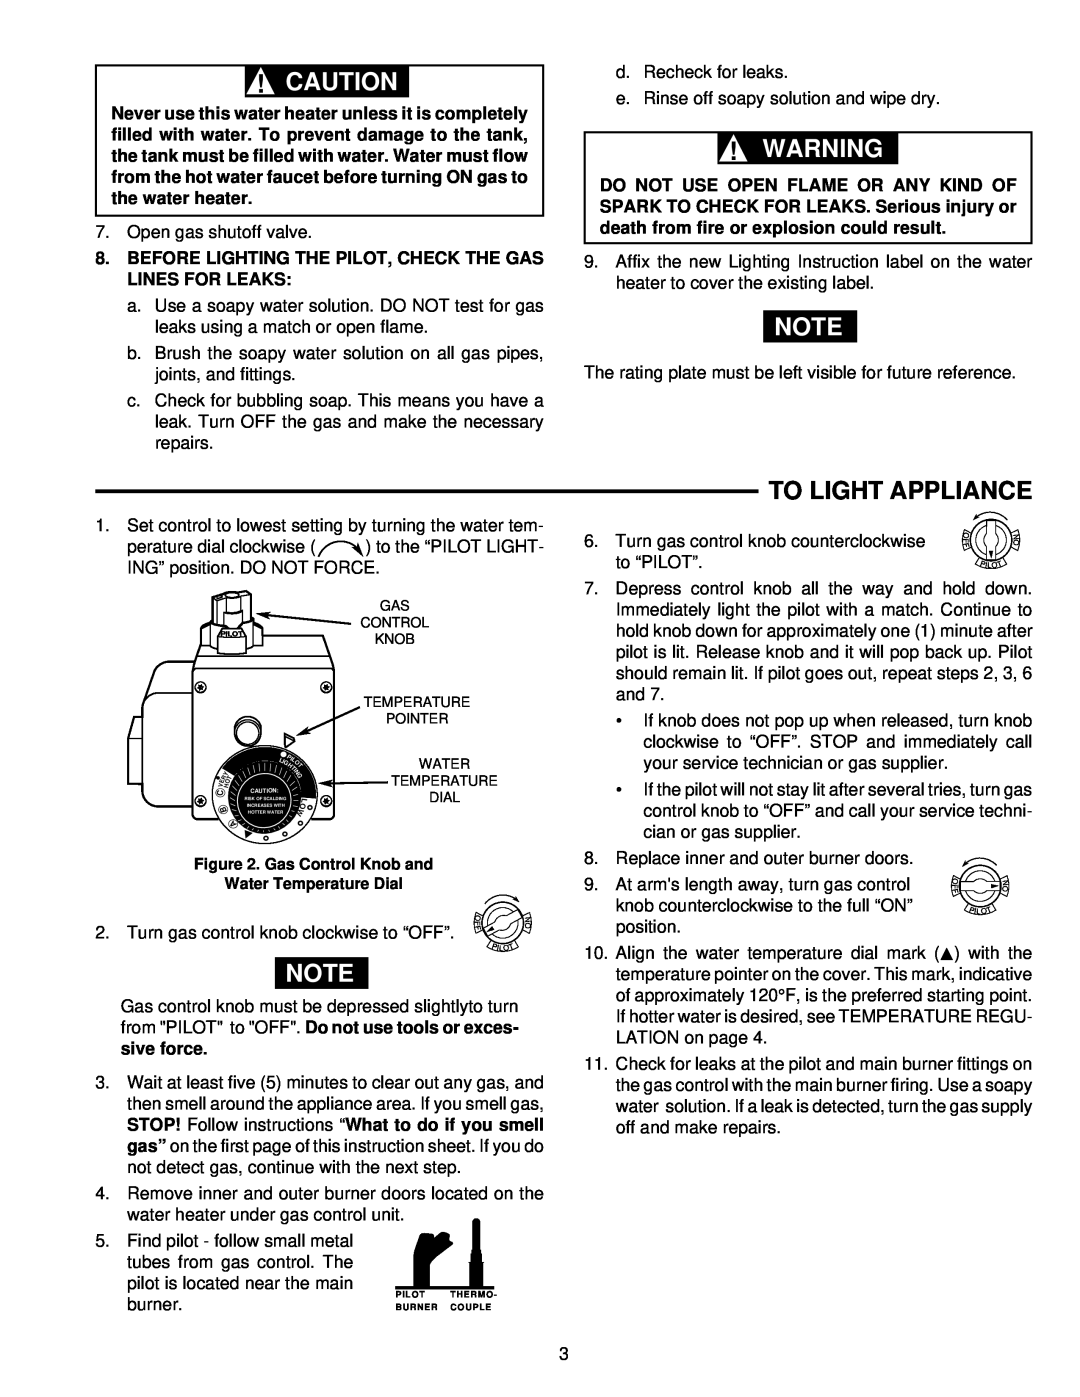 White Rodgers 37C72U installation instructions To Light Appliance, Turn gas control knob clockwise to “OFF” 